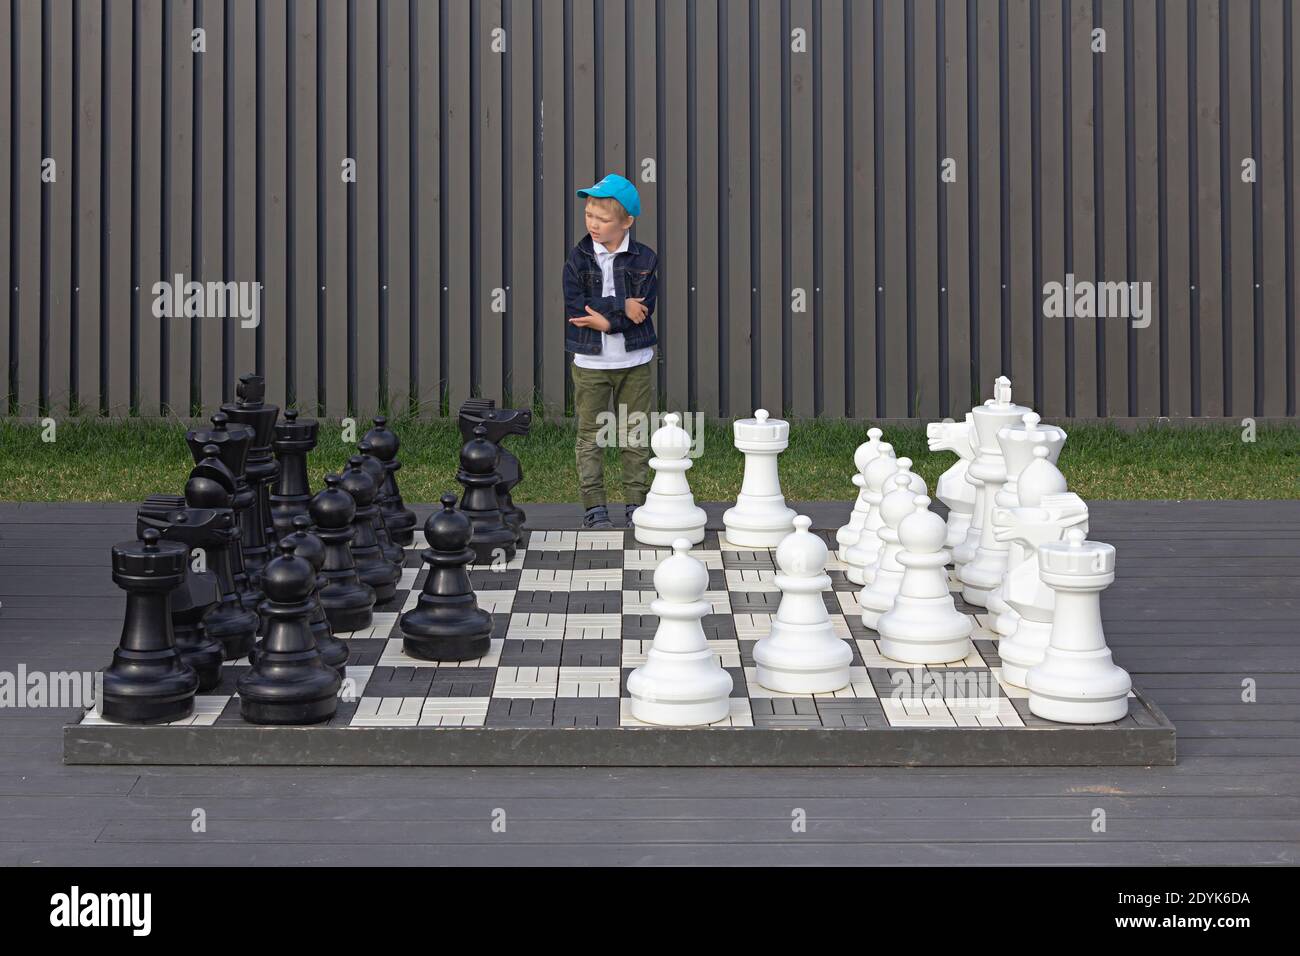 Saint-Petersburg, Russia, July 9, 2017. A young boy thinking about the move in chess, big street outdoor chess board, consept of making choice Stock Photo